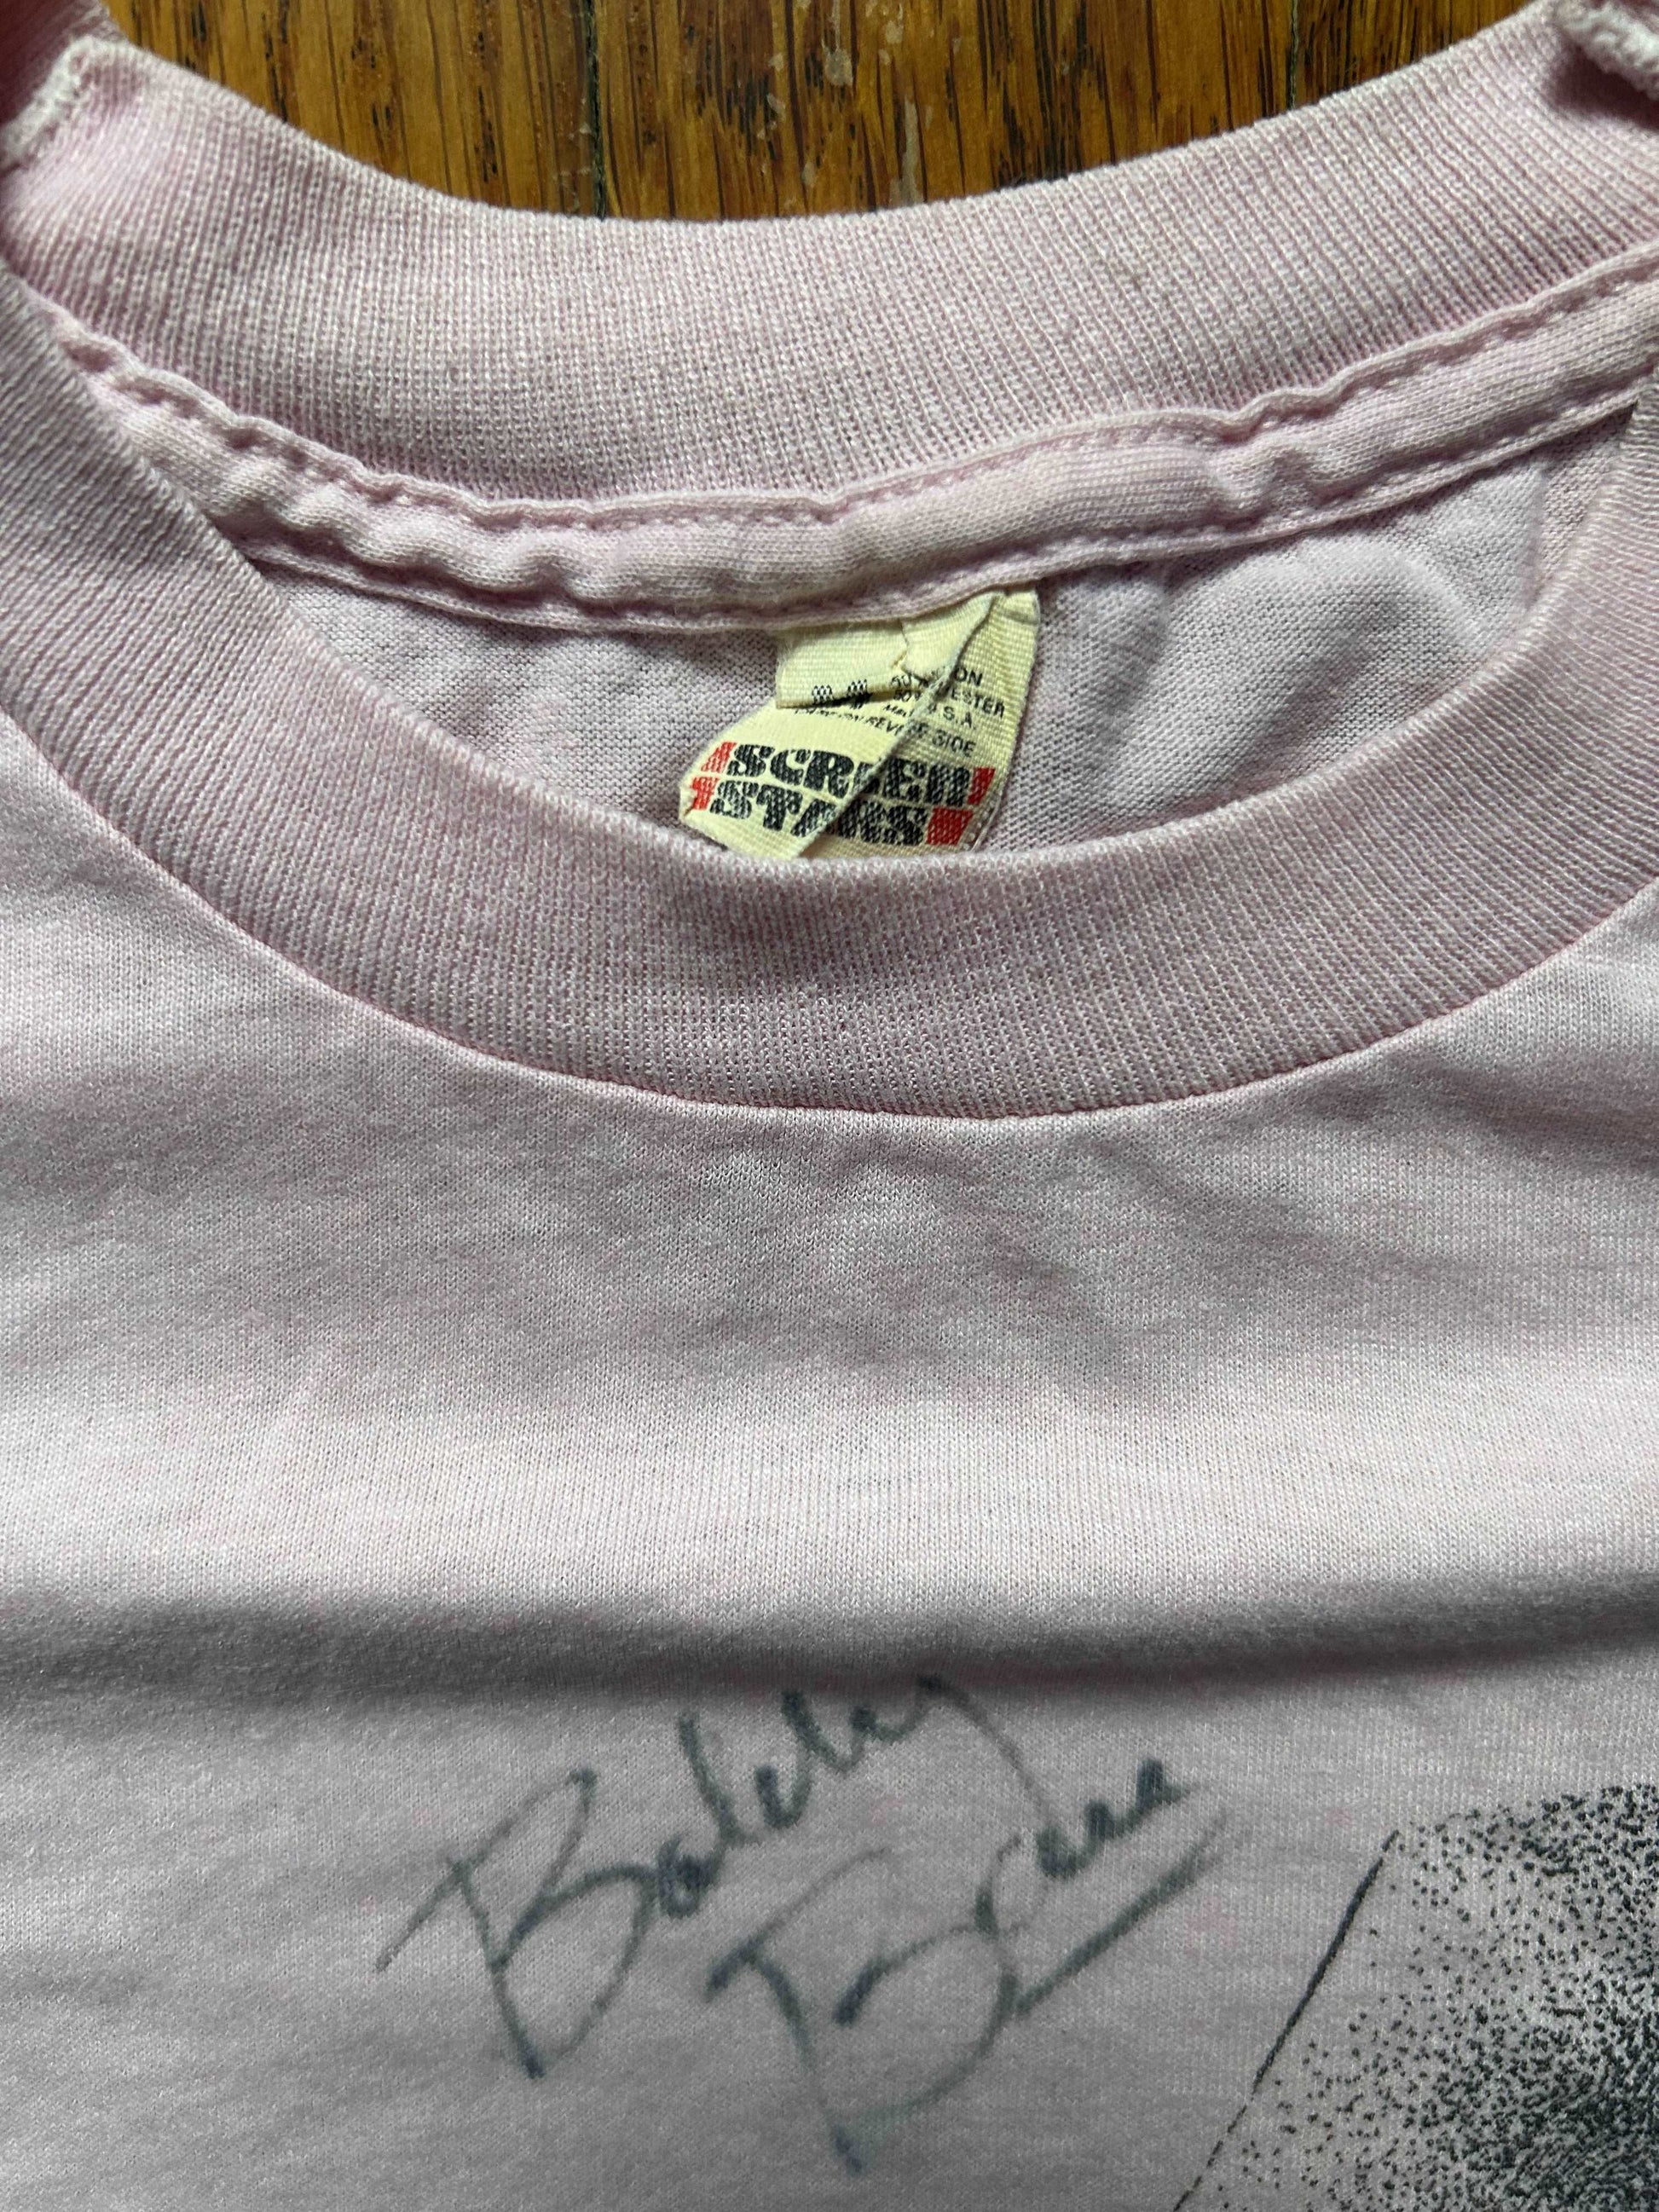 1970s Signed Bobby Bare Tee Size - S